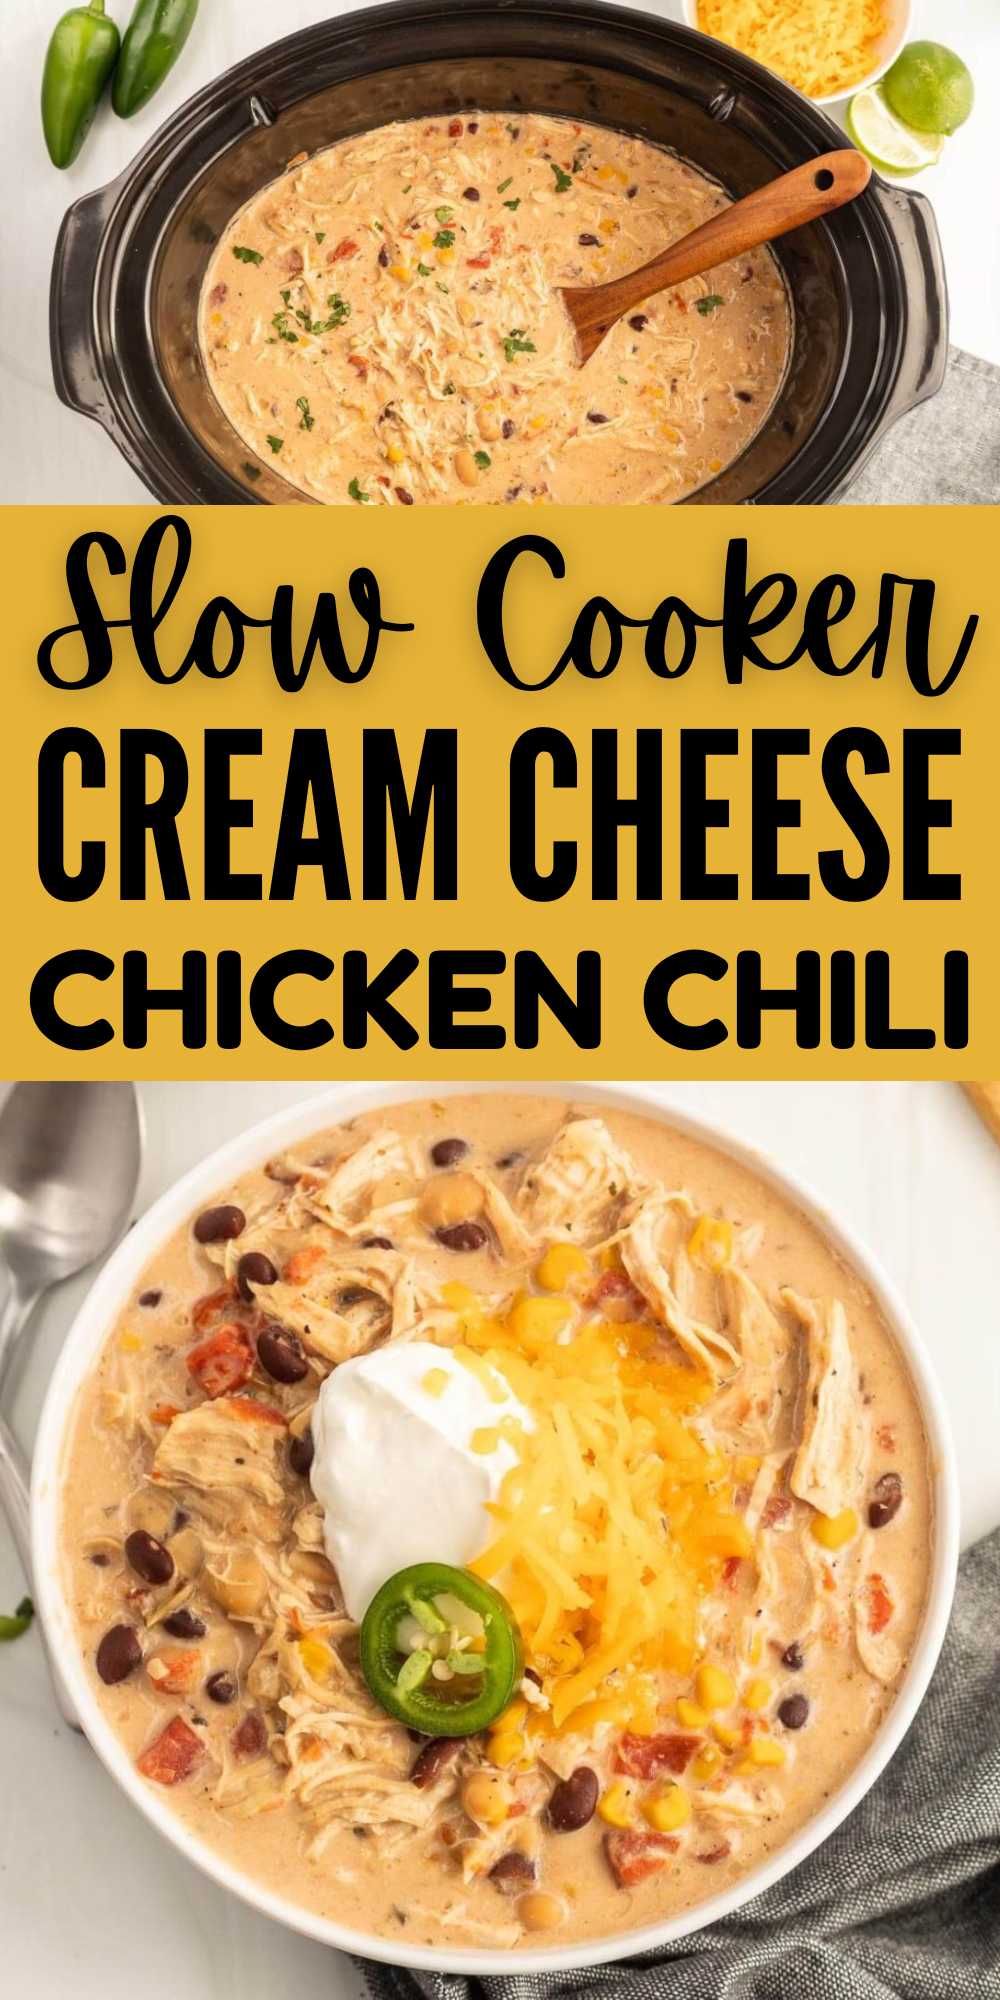 Crockpot cream cheese chicken chili recipe has everything you love about classic chili. This chili is easy and delicious. Tons of shredded chicken with lots of Mexican flavor and an amazing creamy broth make this a big hit around here. This creamy chili is easy to make with simple ingredients. #eatingonadime #crockpotchili #creamcheesechickenchili